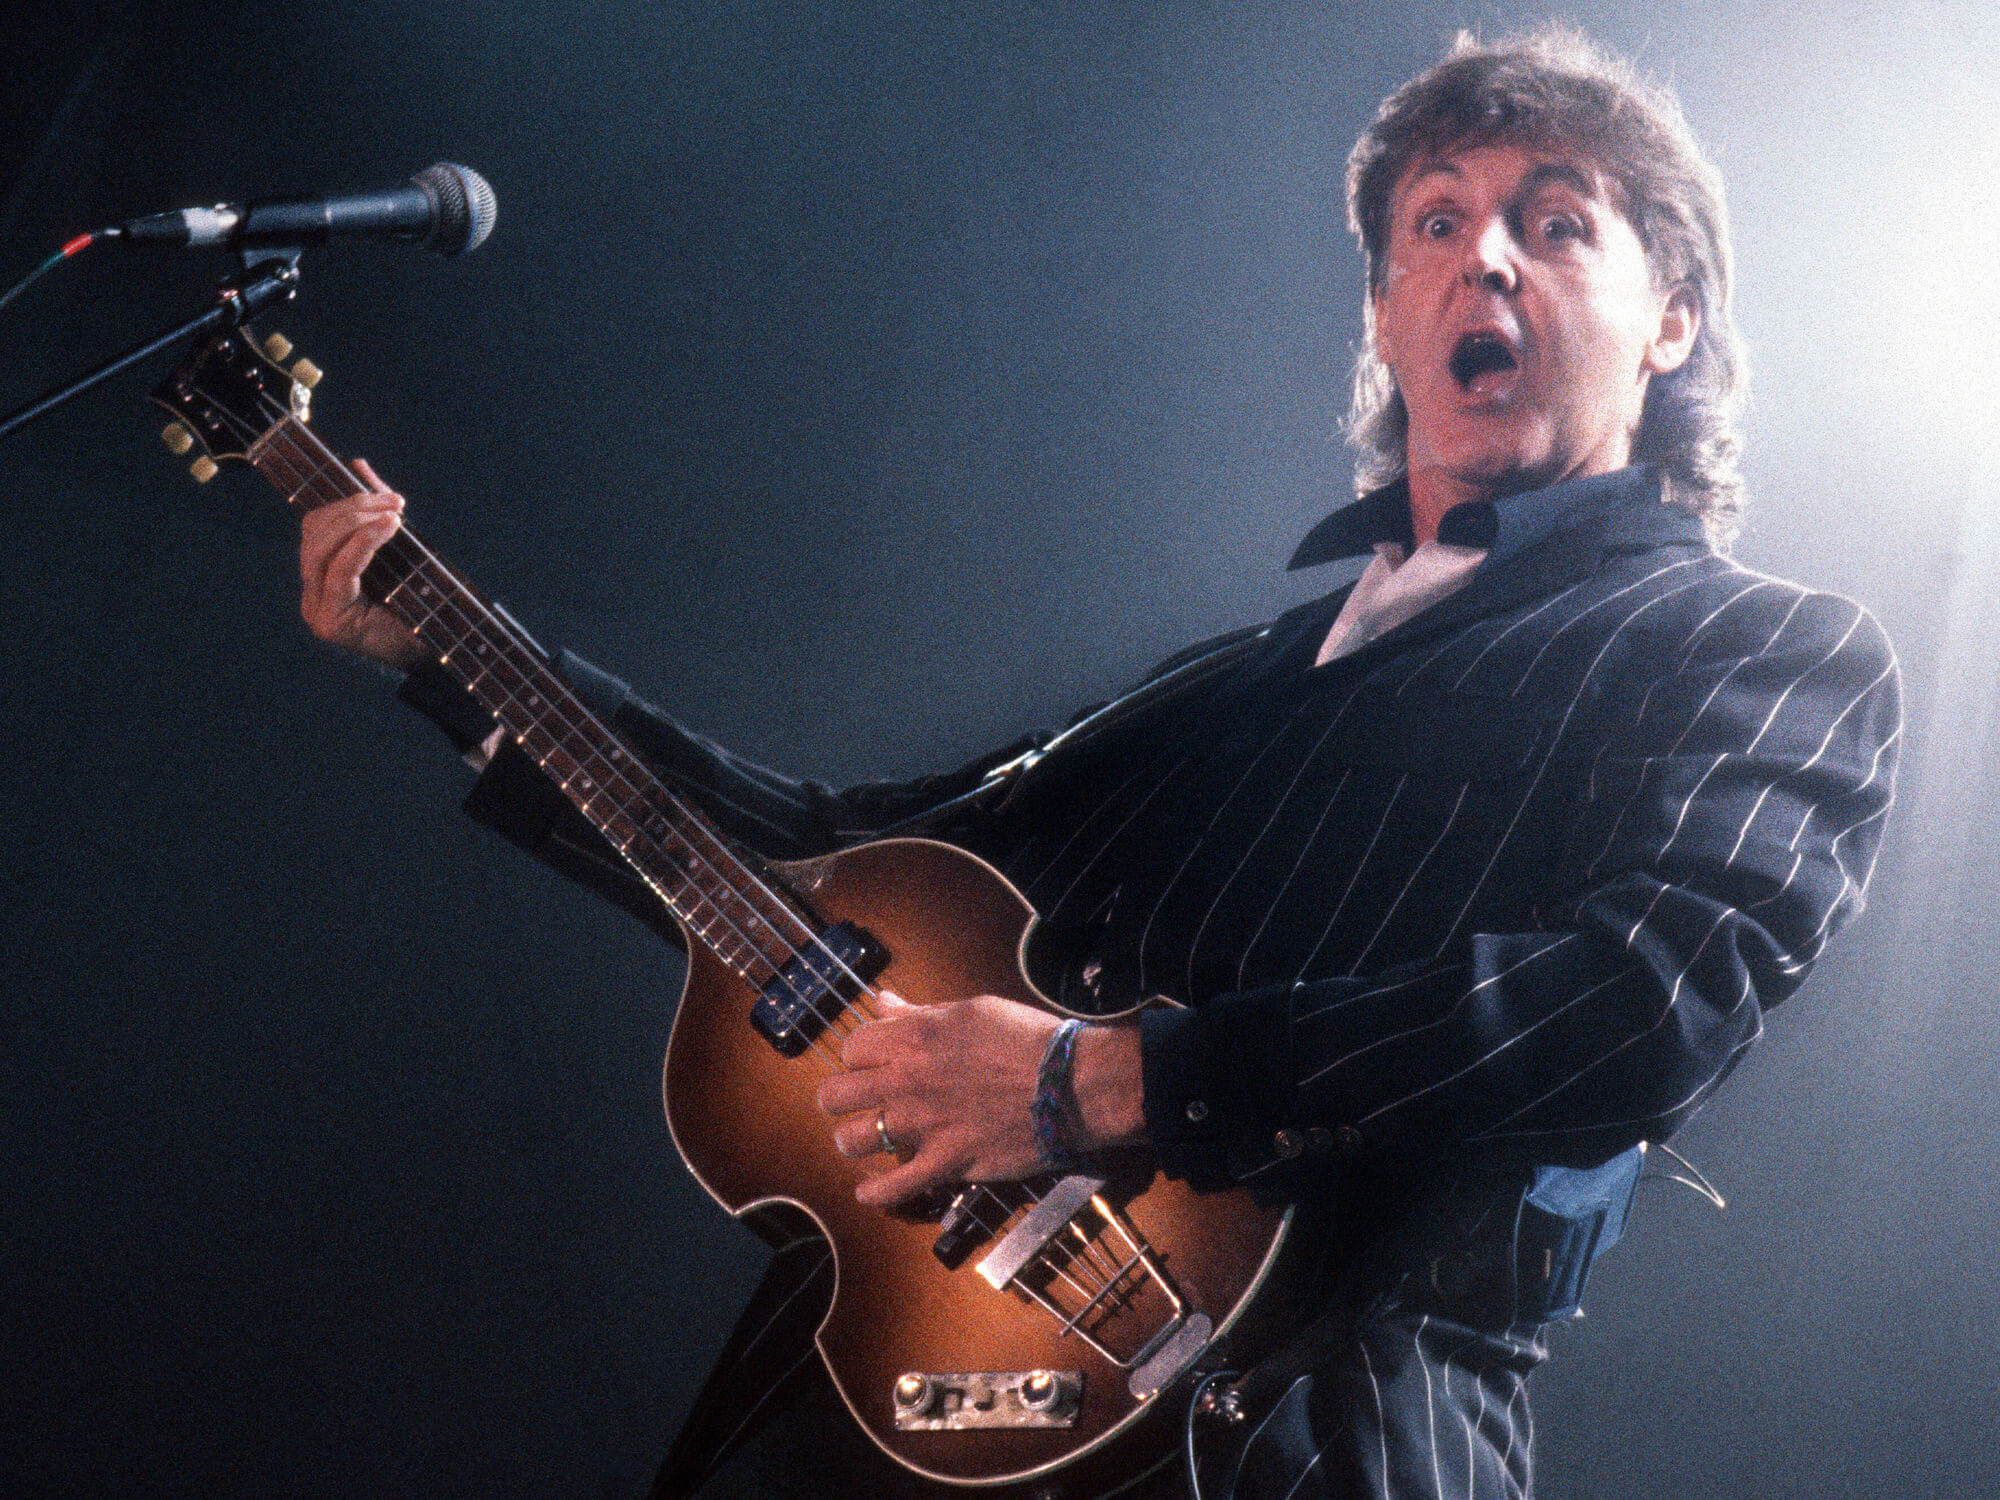 Paul McCartney reunited with stolen Höfner bass after more than 50 years